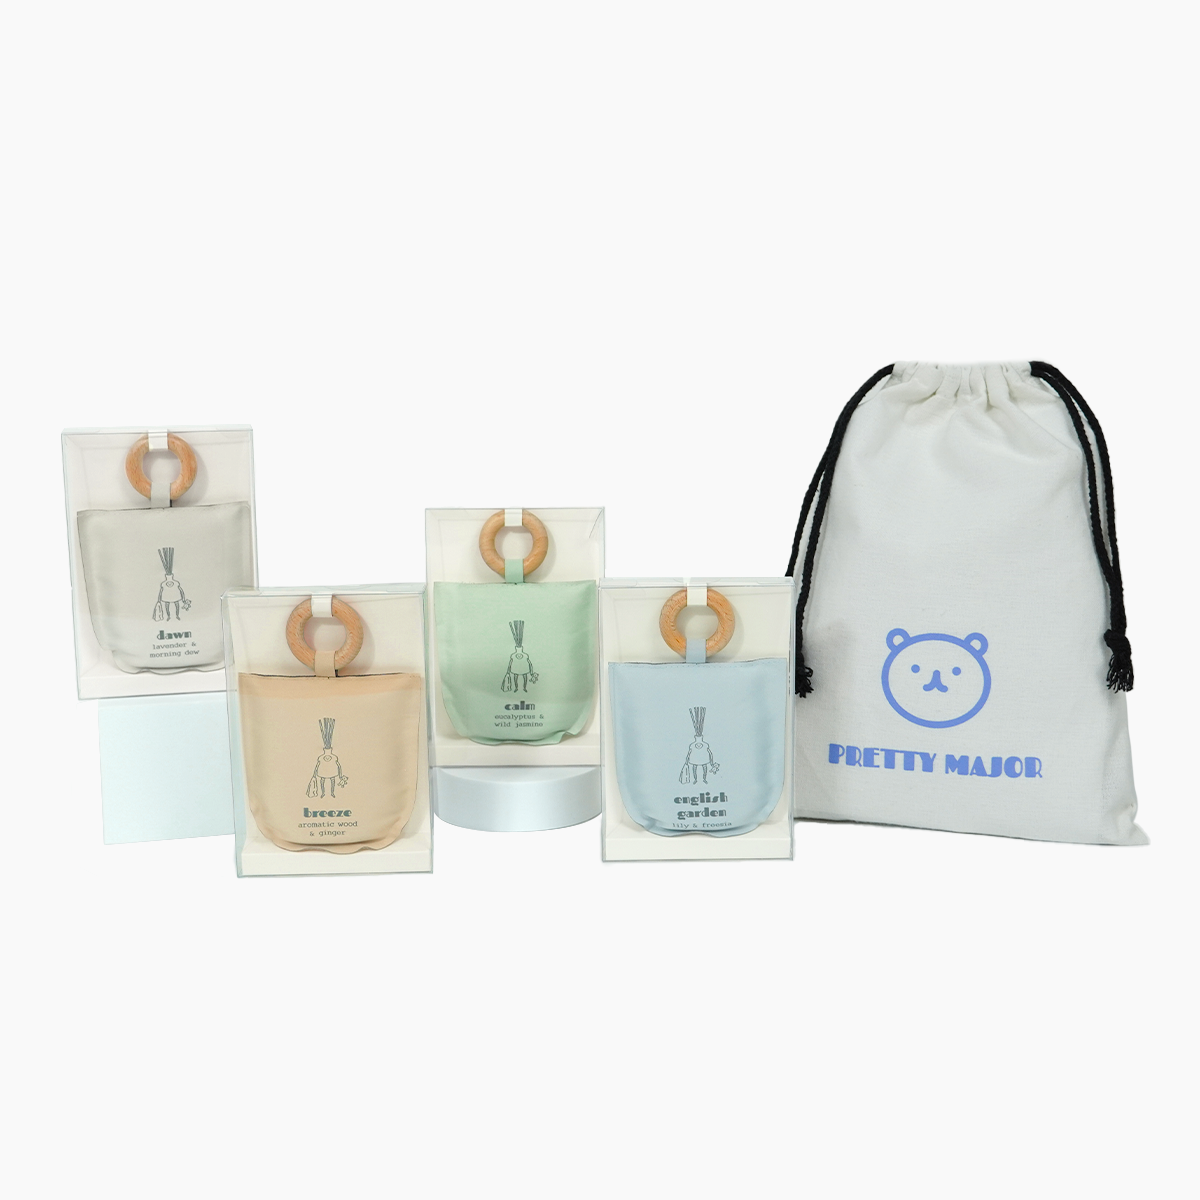 Scented Sachet Gift Set By Pretty Major